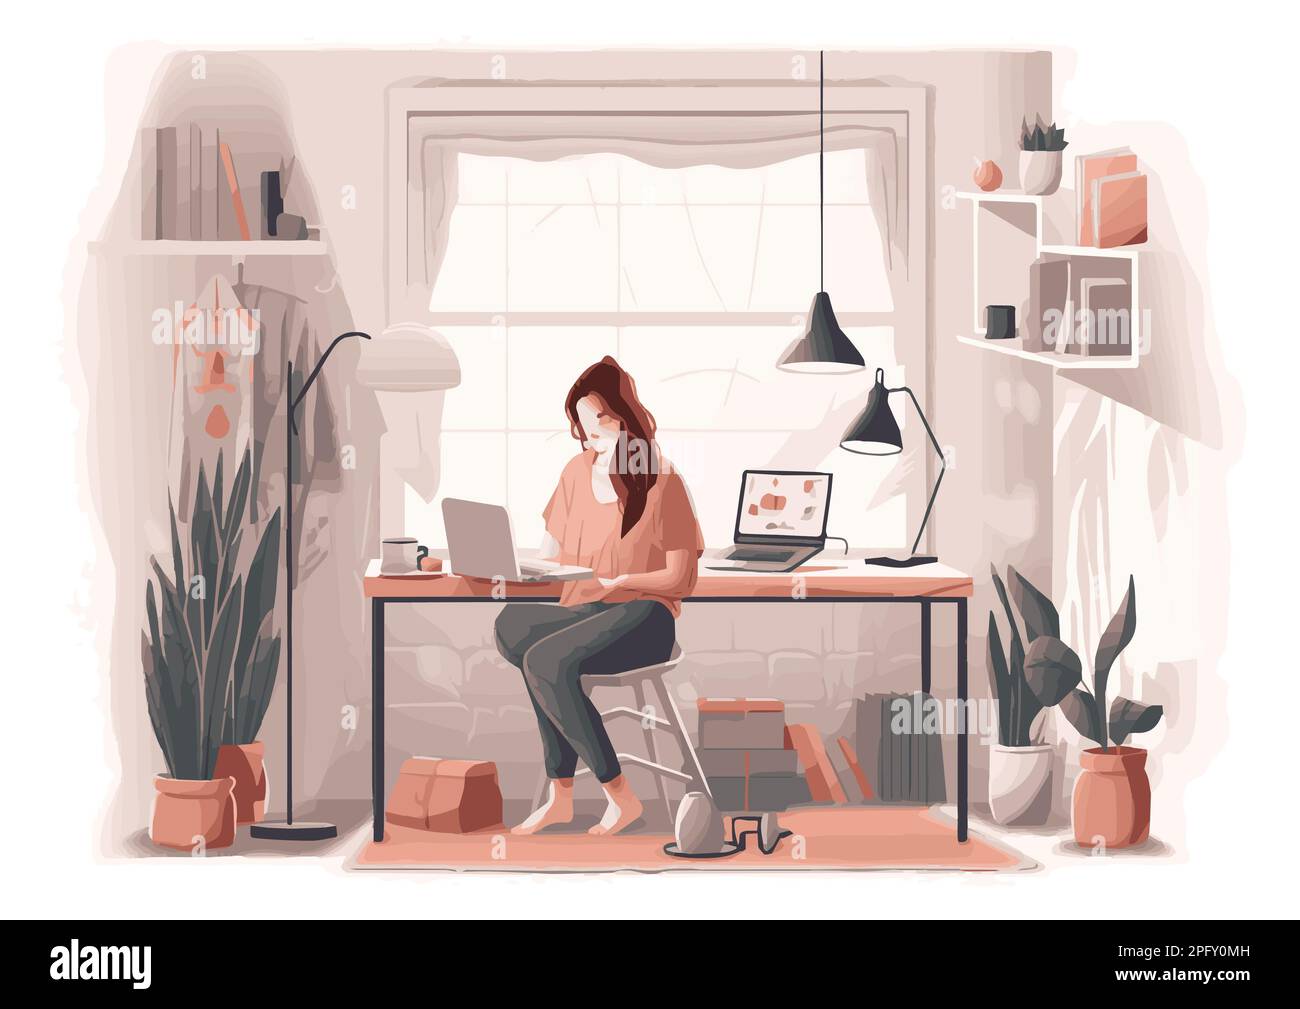 Working From Home WFH Concept Vector Illustration Stock Photo